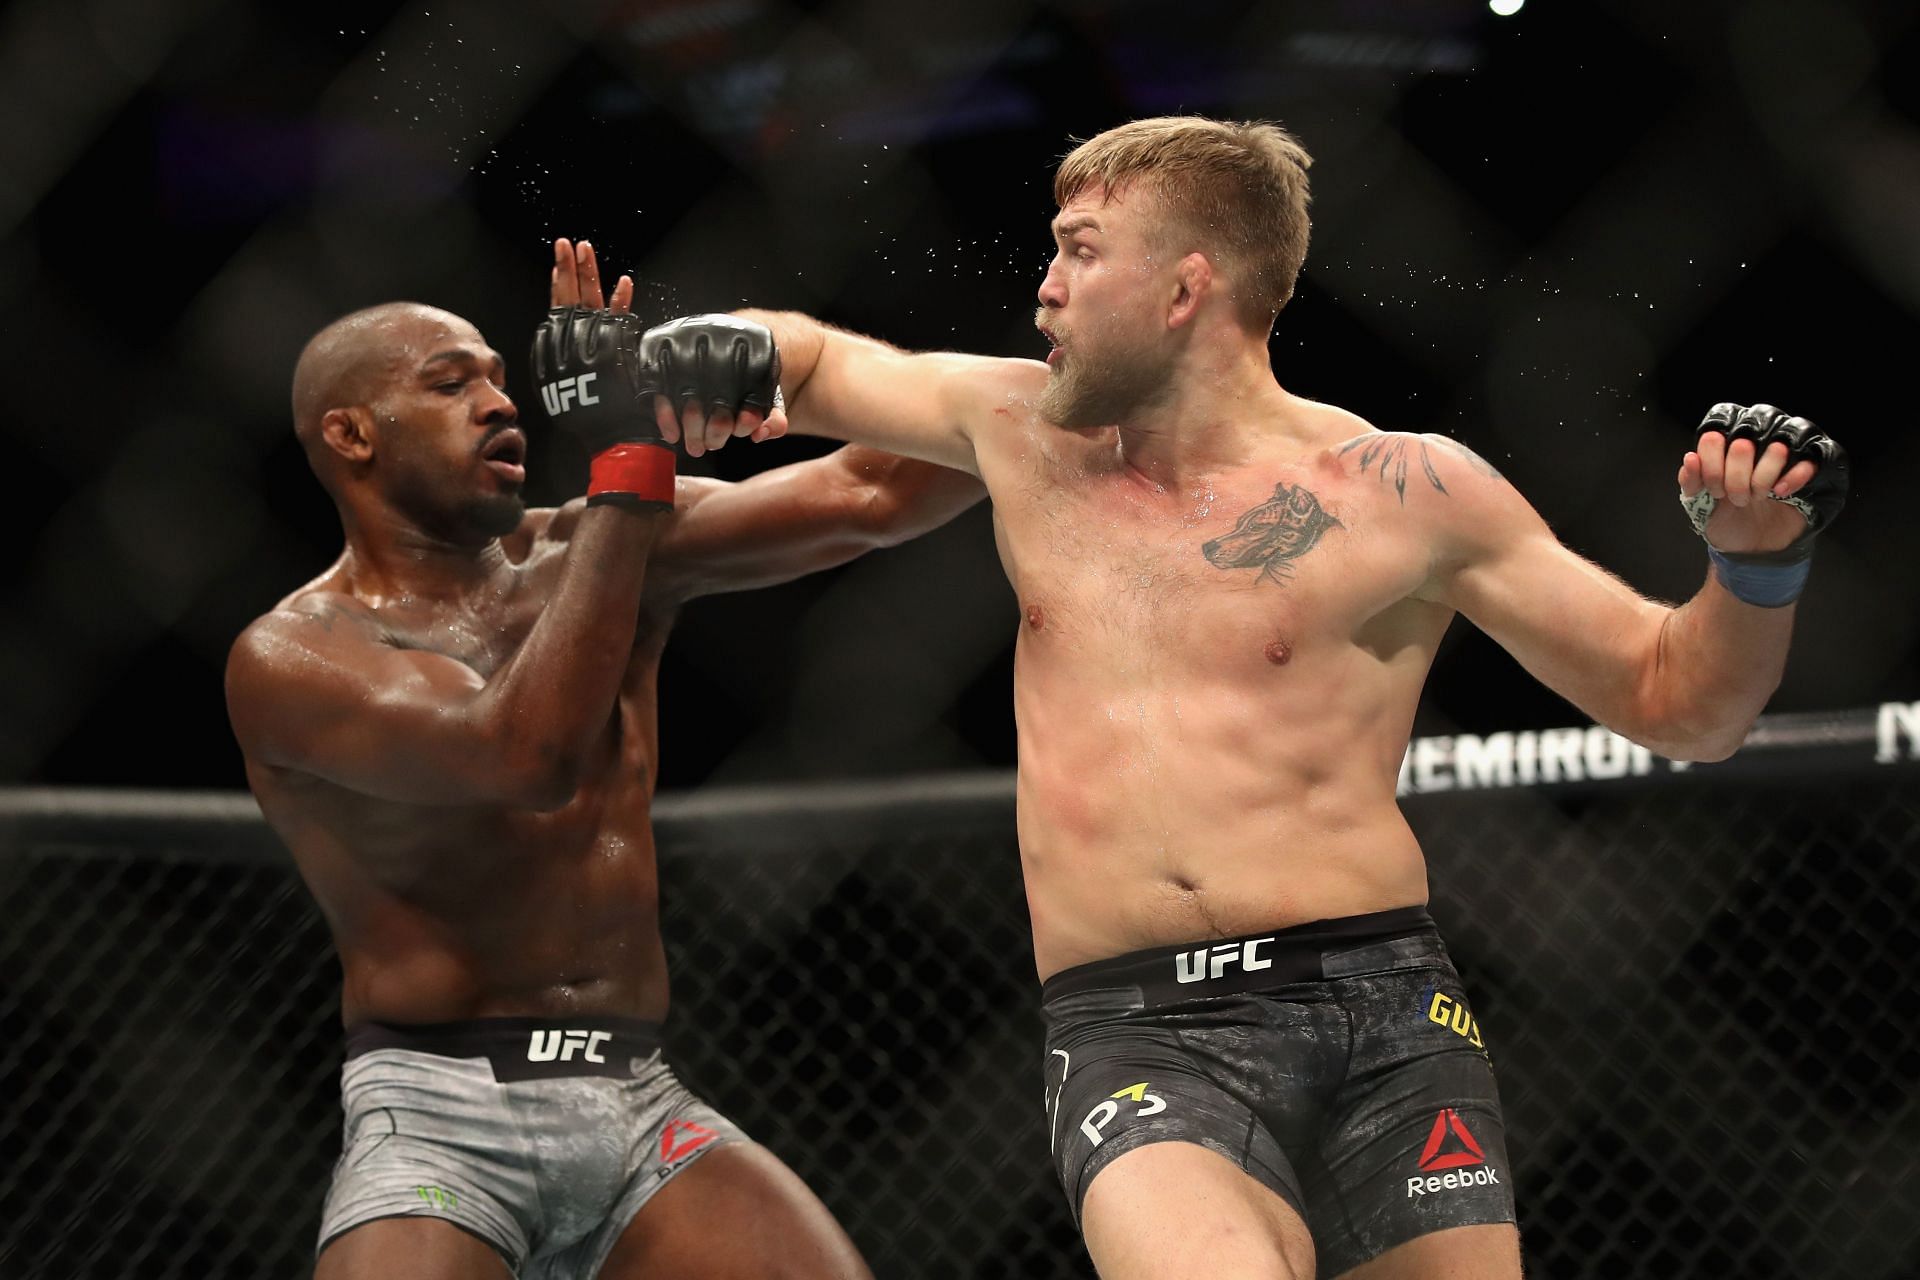 Can Alexander Gustafsson recapture his old form this weekend in London?